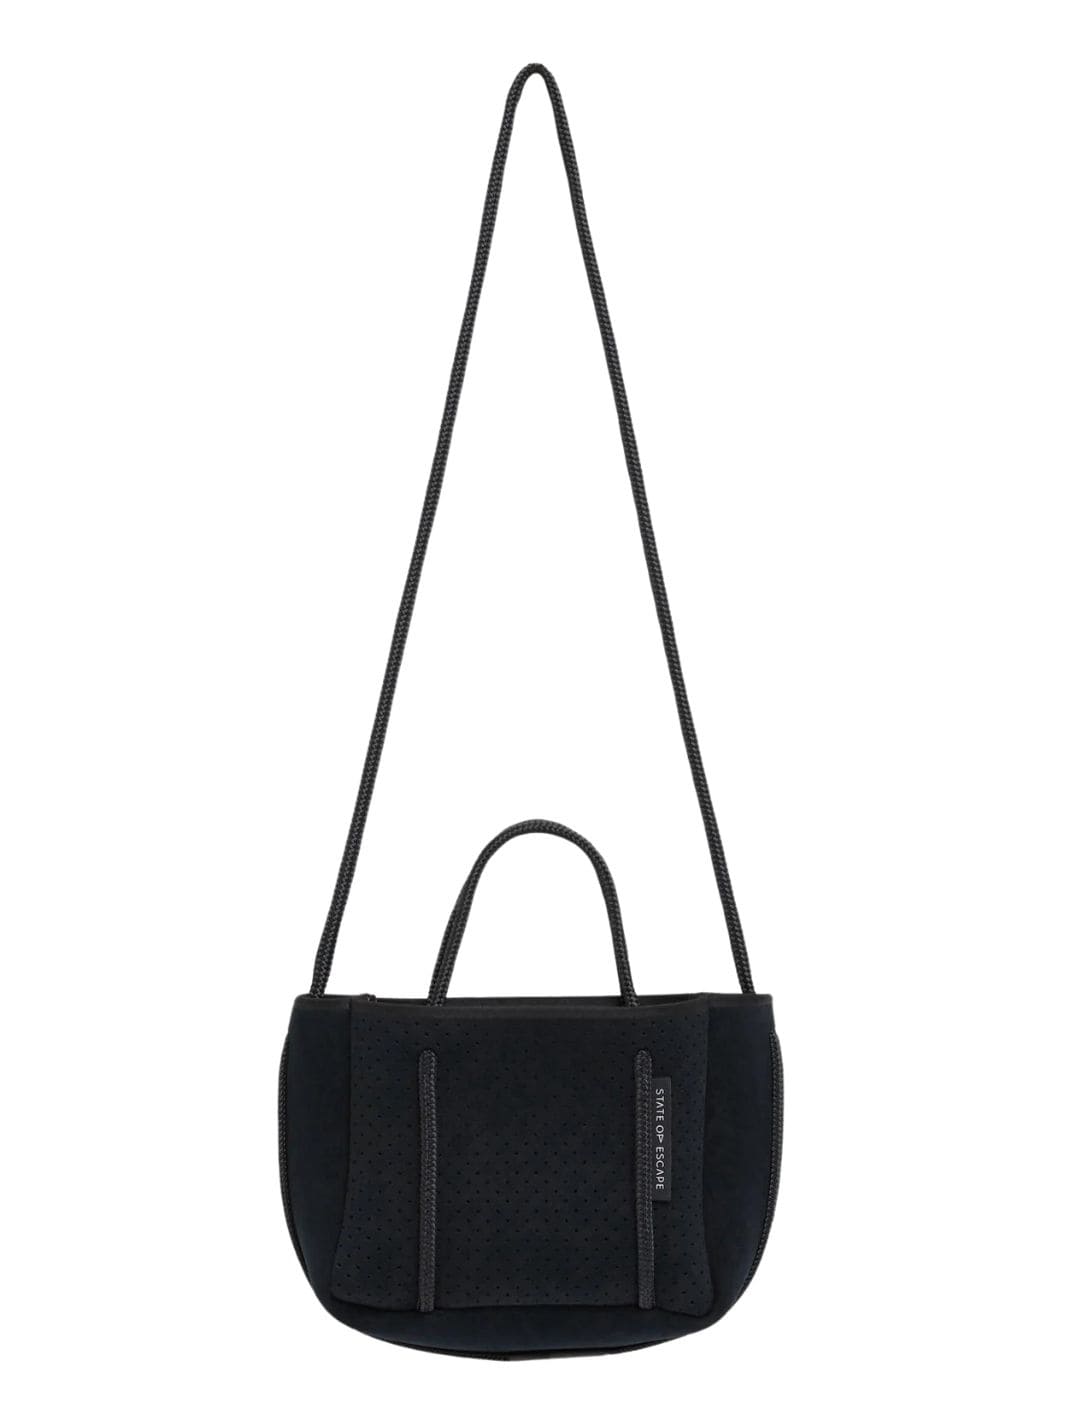 State of Escape Bags Tote Bag | Micro Blackout